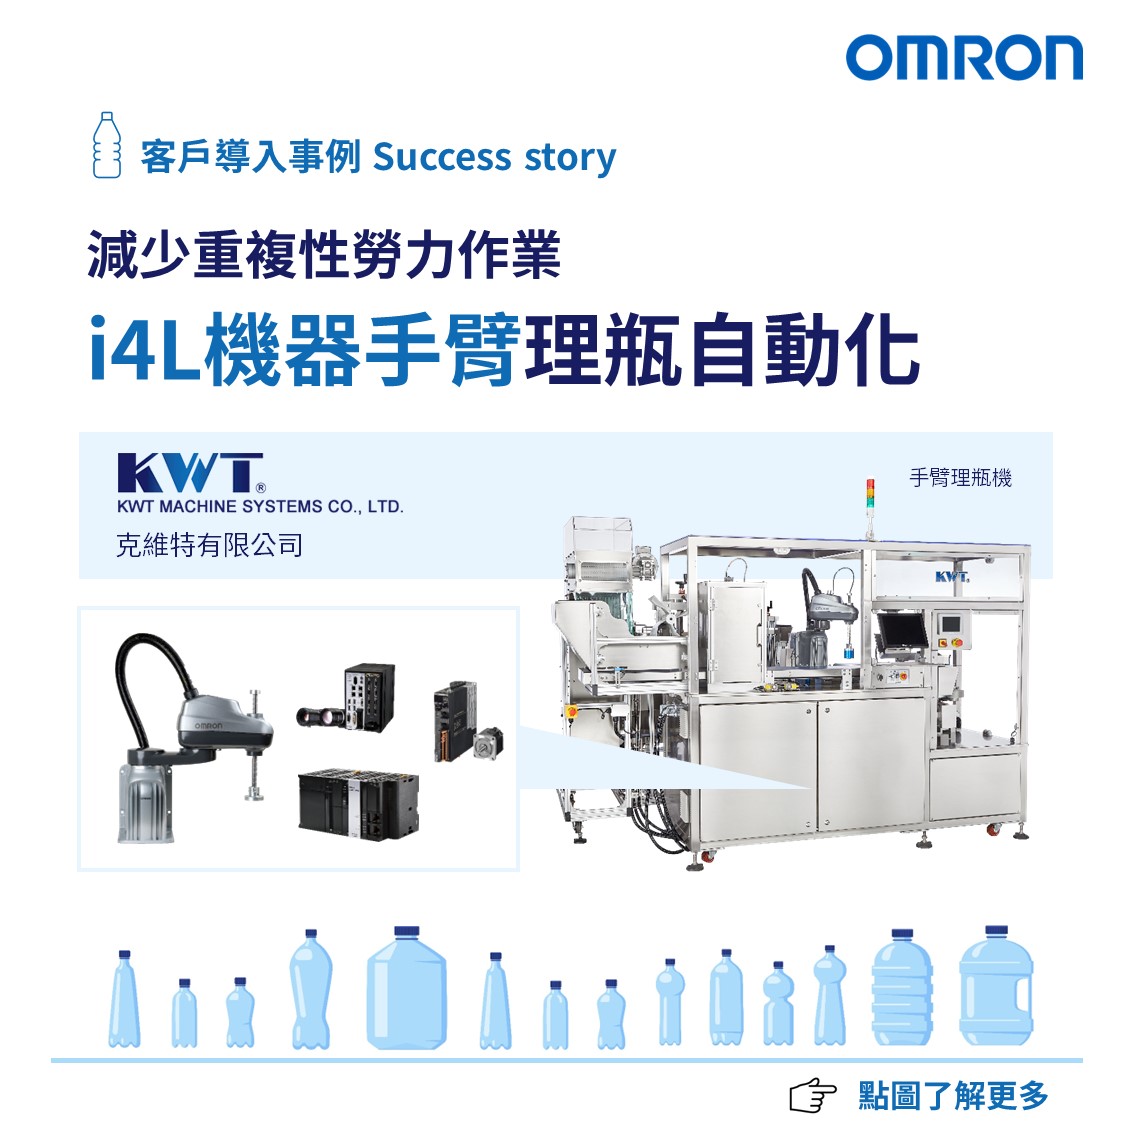 Cutting-Edge Automation: Robotic Unscrambler by KWT with OMRON Technology